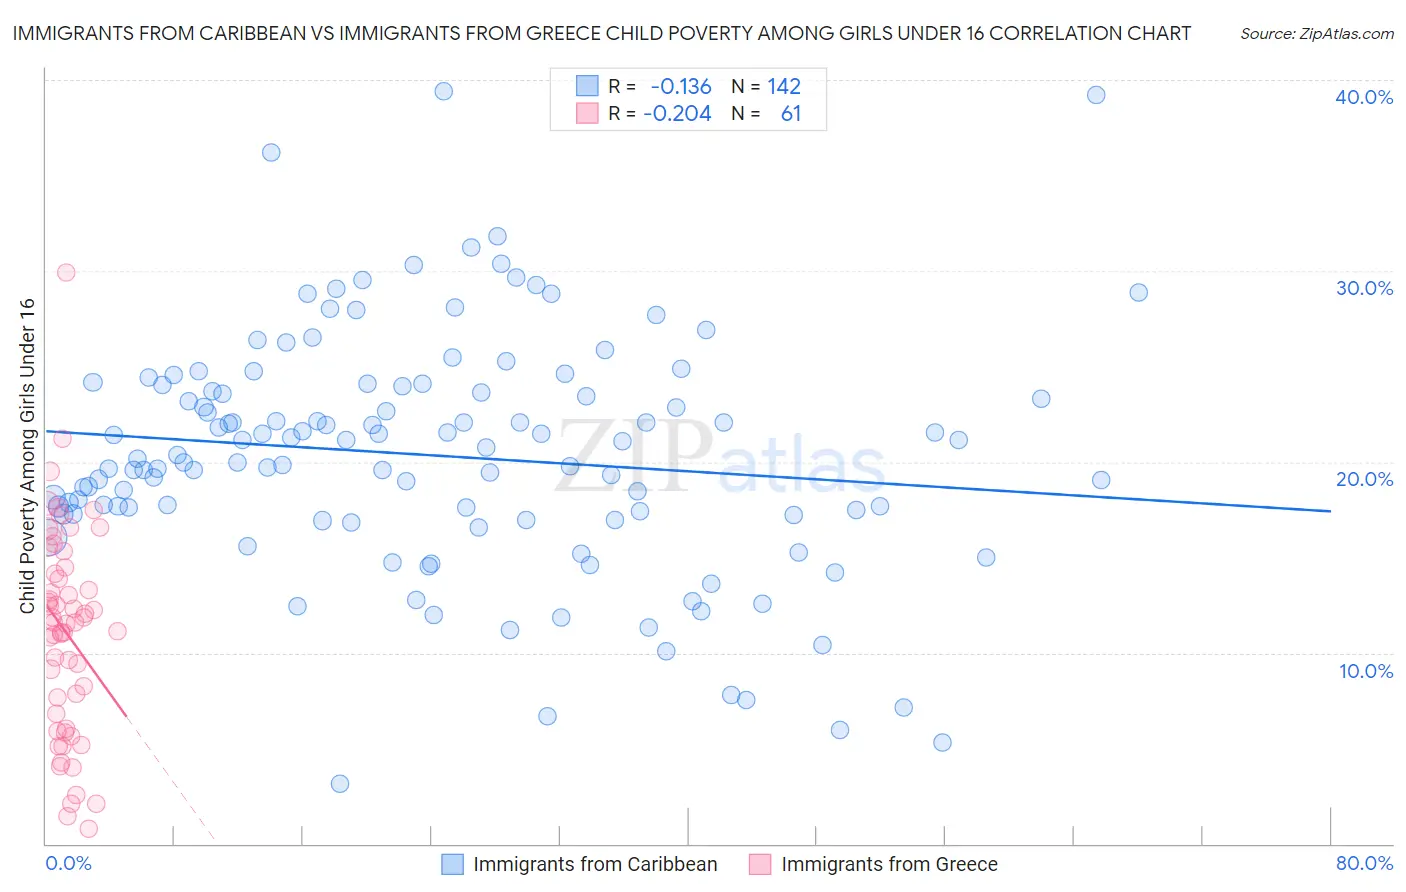 Immigrants from Caribbean vs Immigrants from Greece Child Poverty Among Girls Under 16